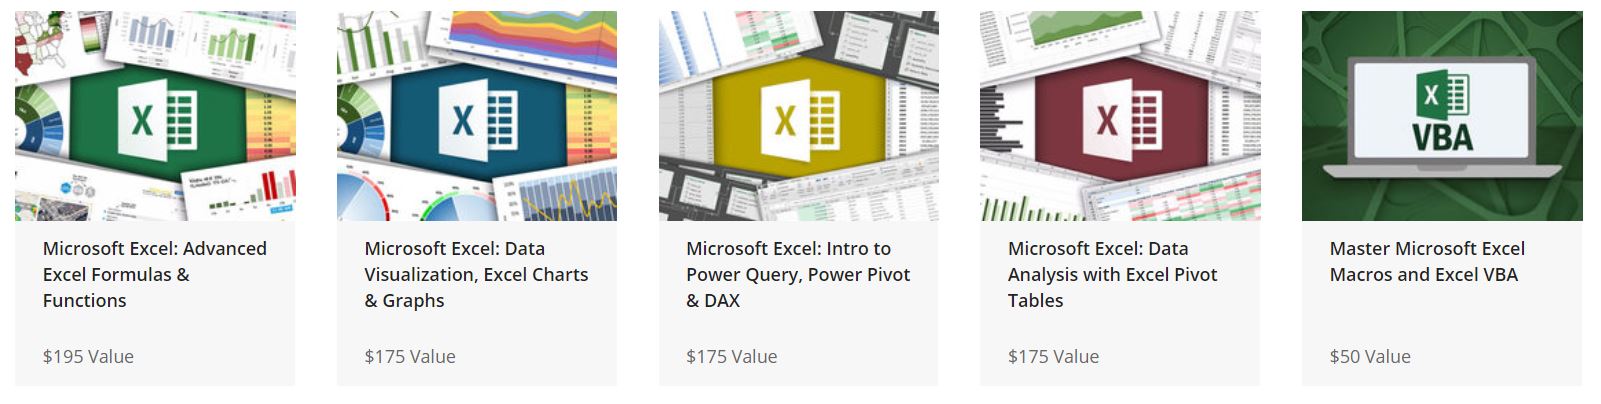 The Ultimate Microsoft Excel Certification Training Bundle online courses